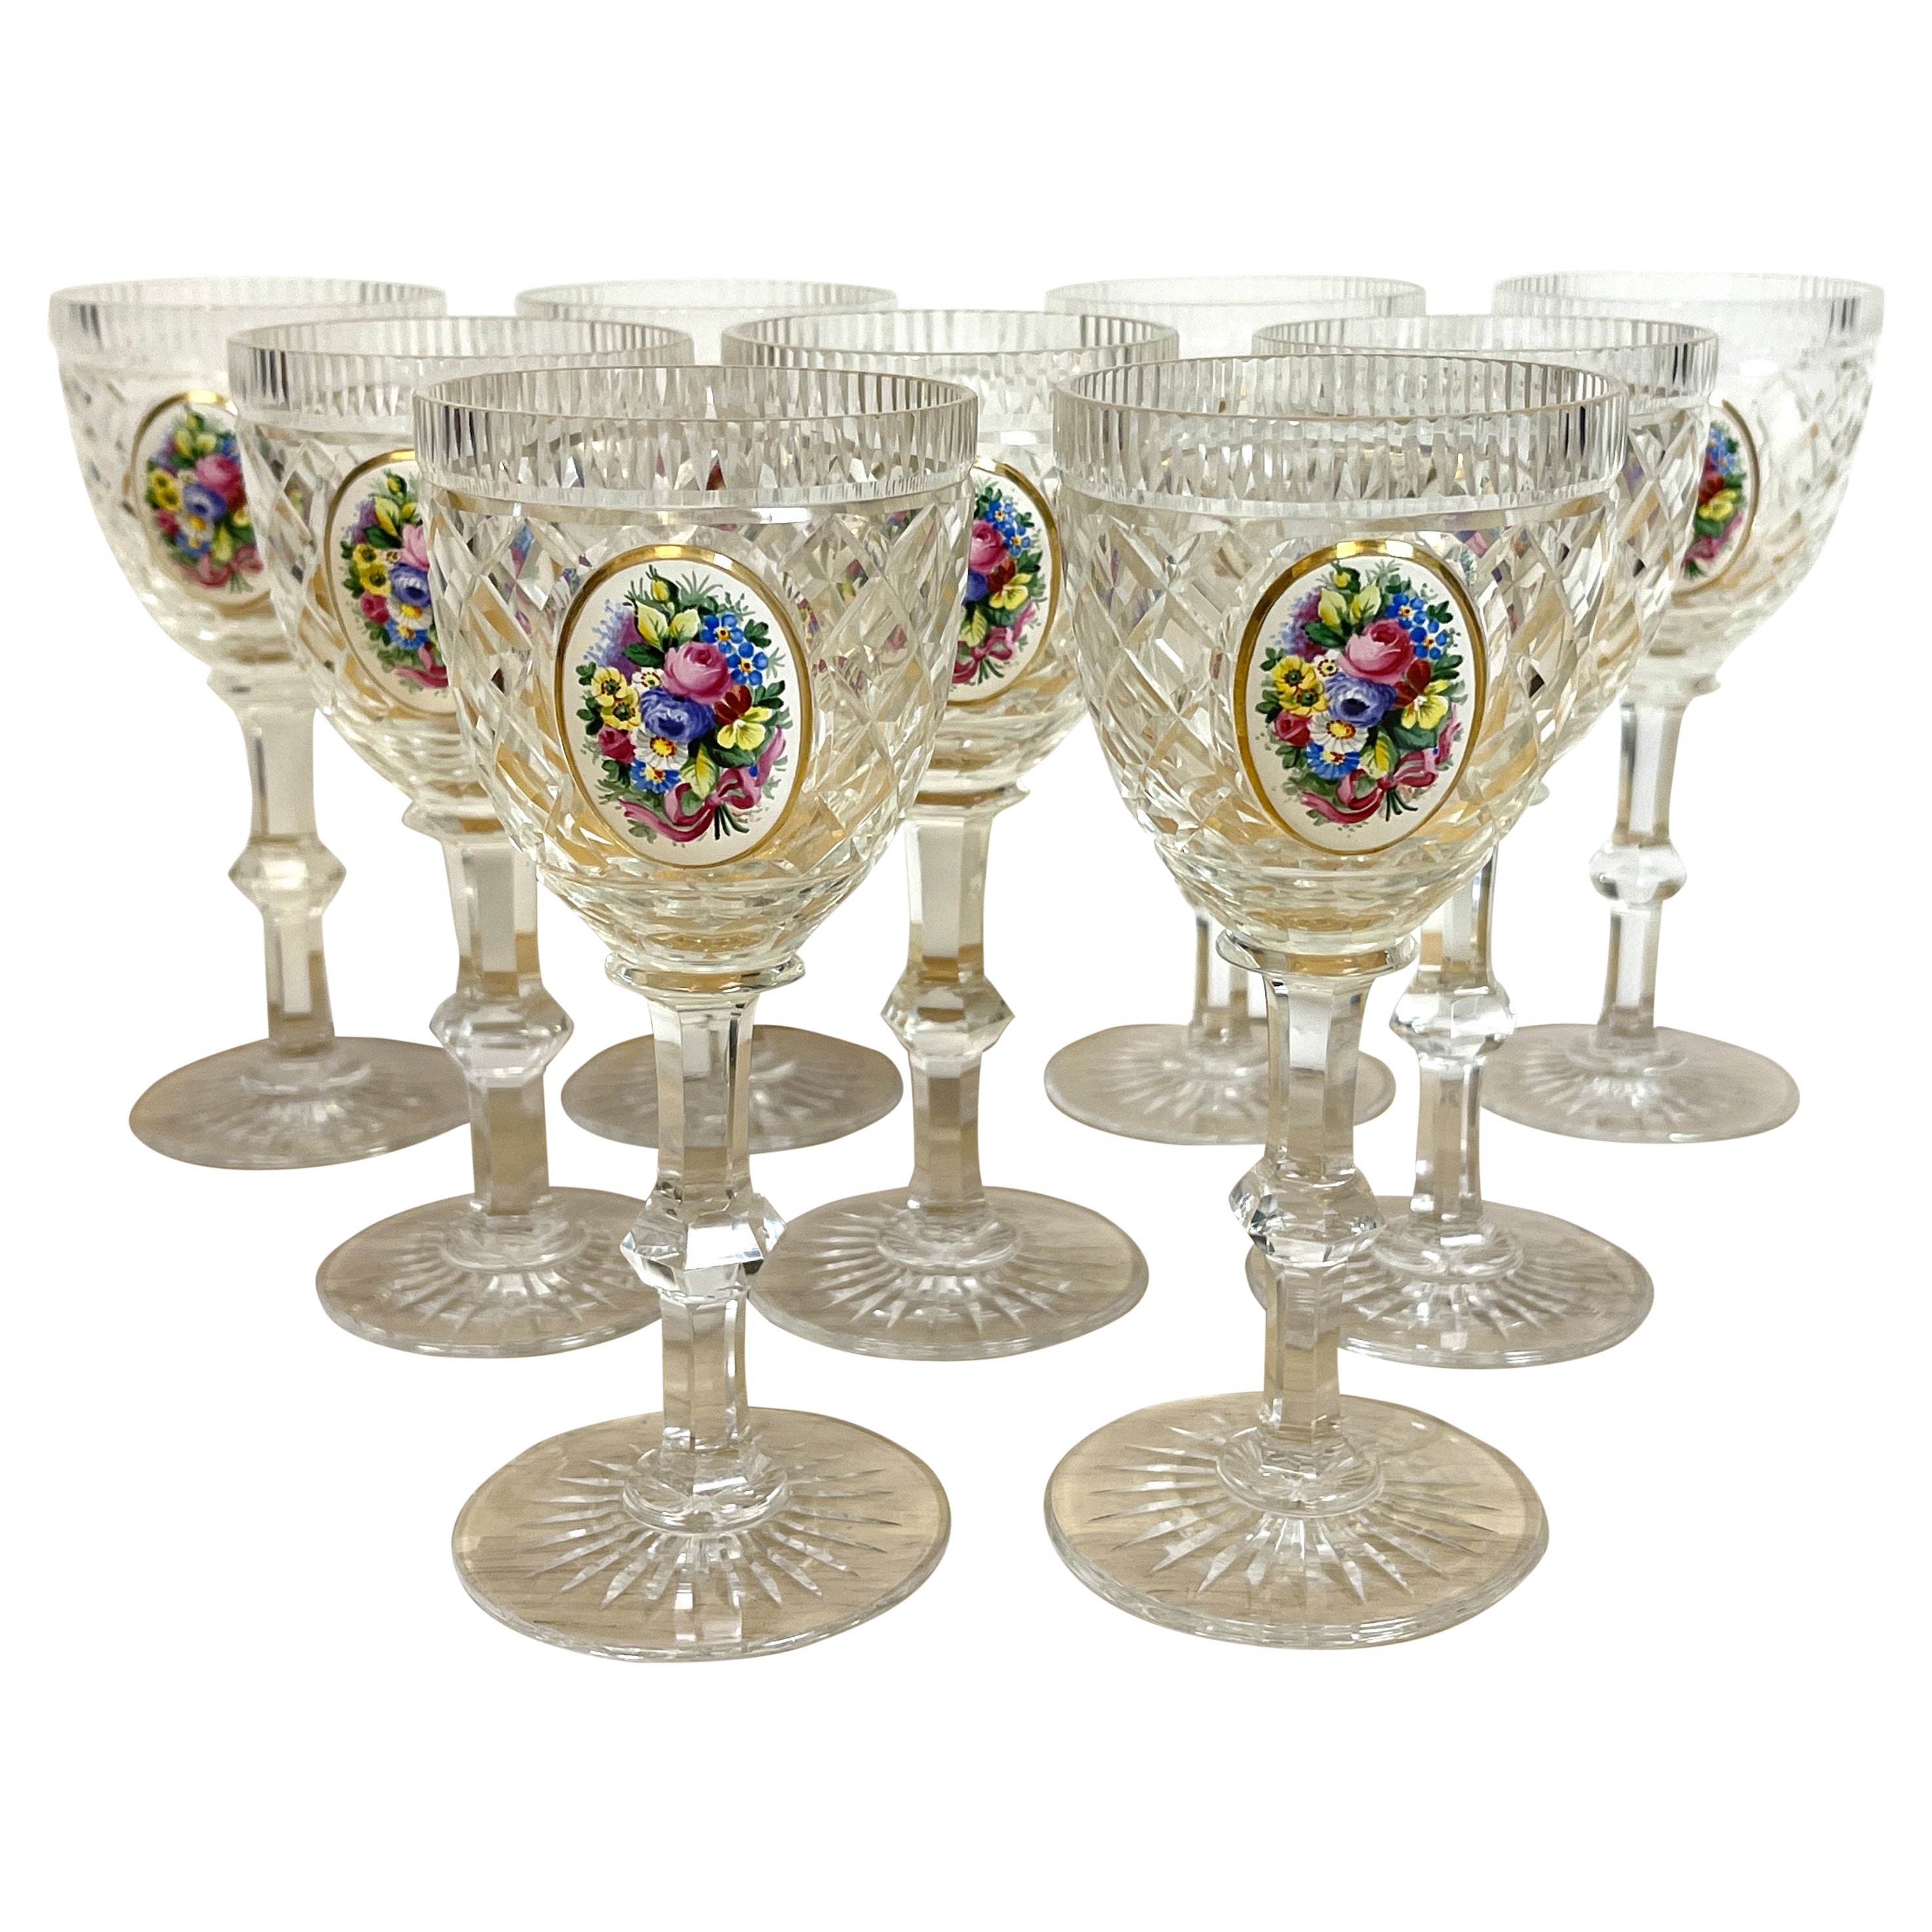 8 Exquisite Moser Floral Enameled Cut to Clear Enamel Glasses